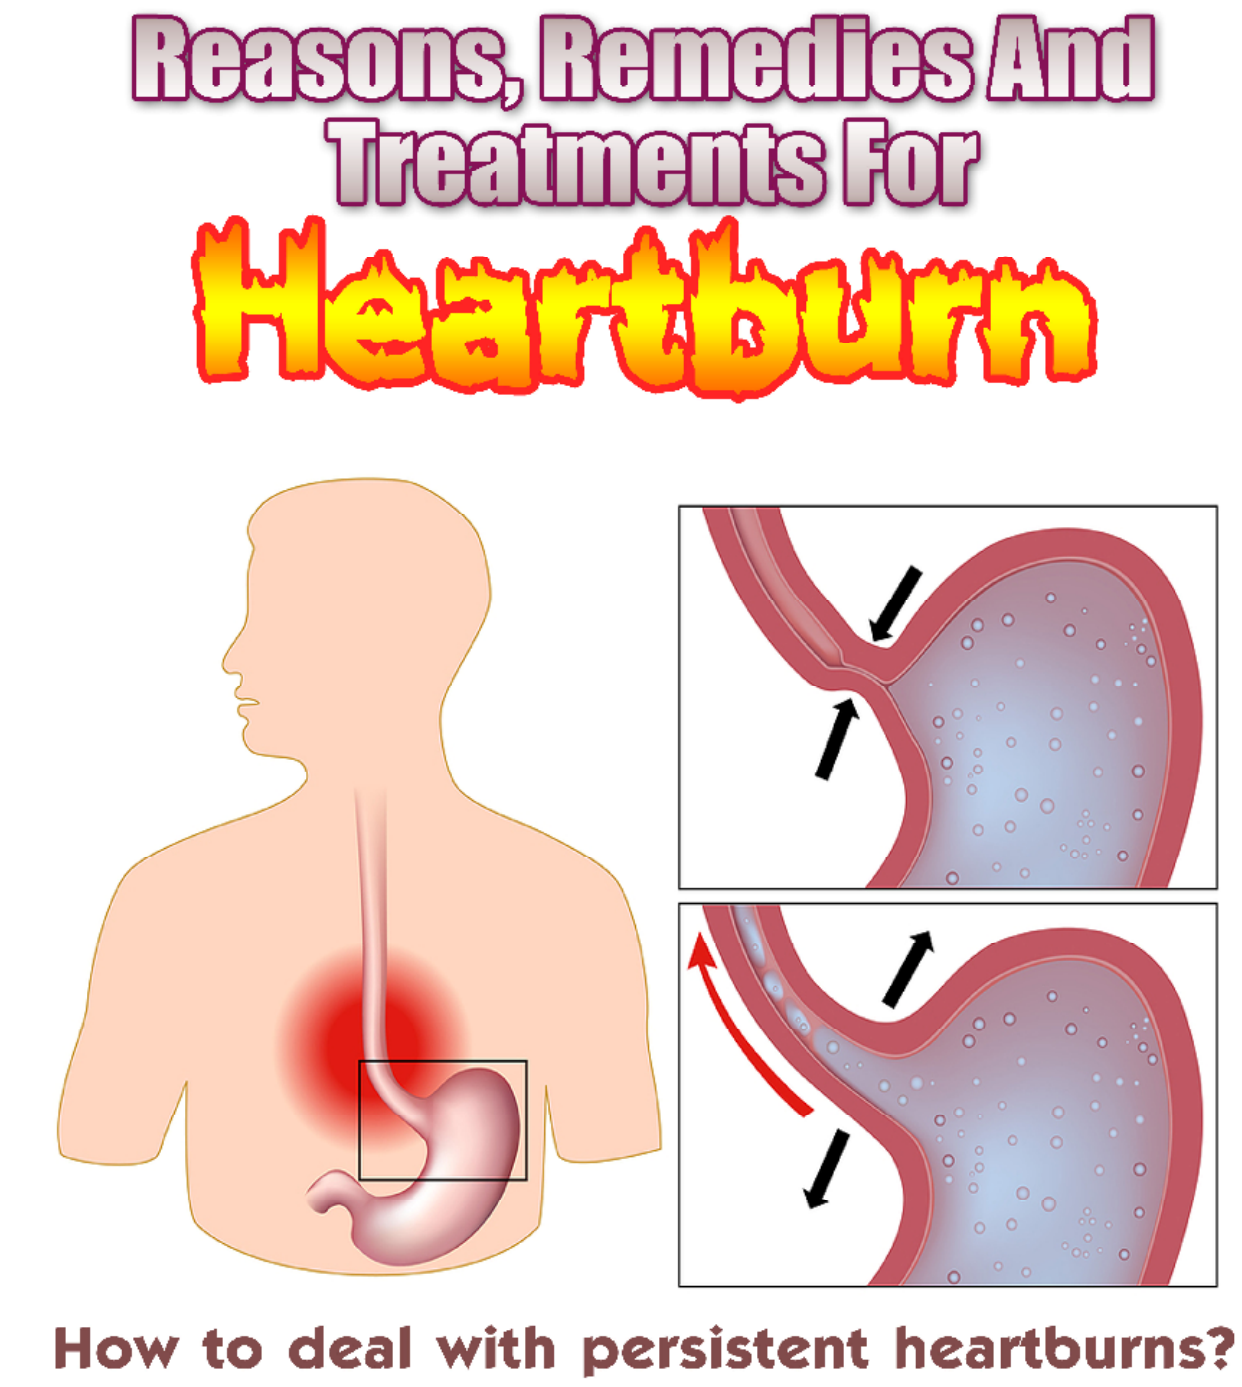 Reasons, Remedies and Treatments for Heartburn